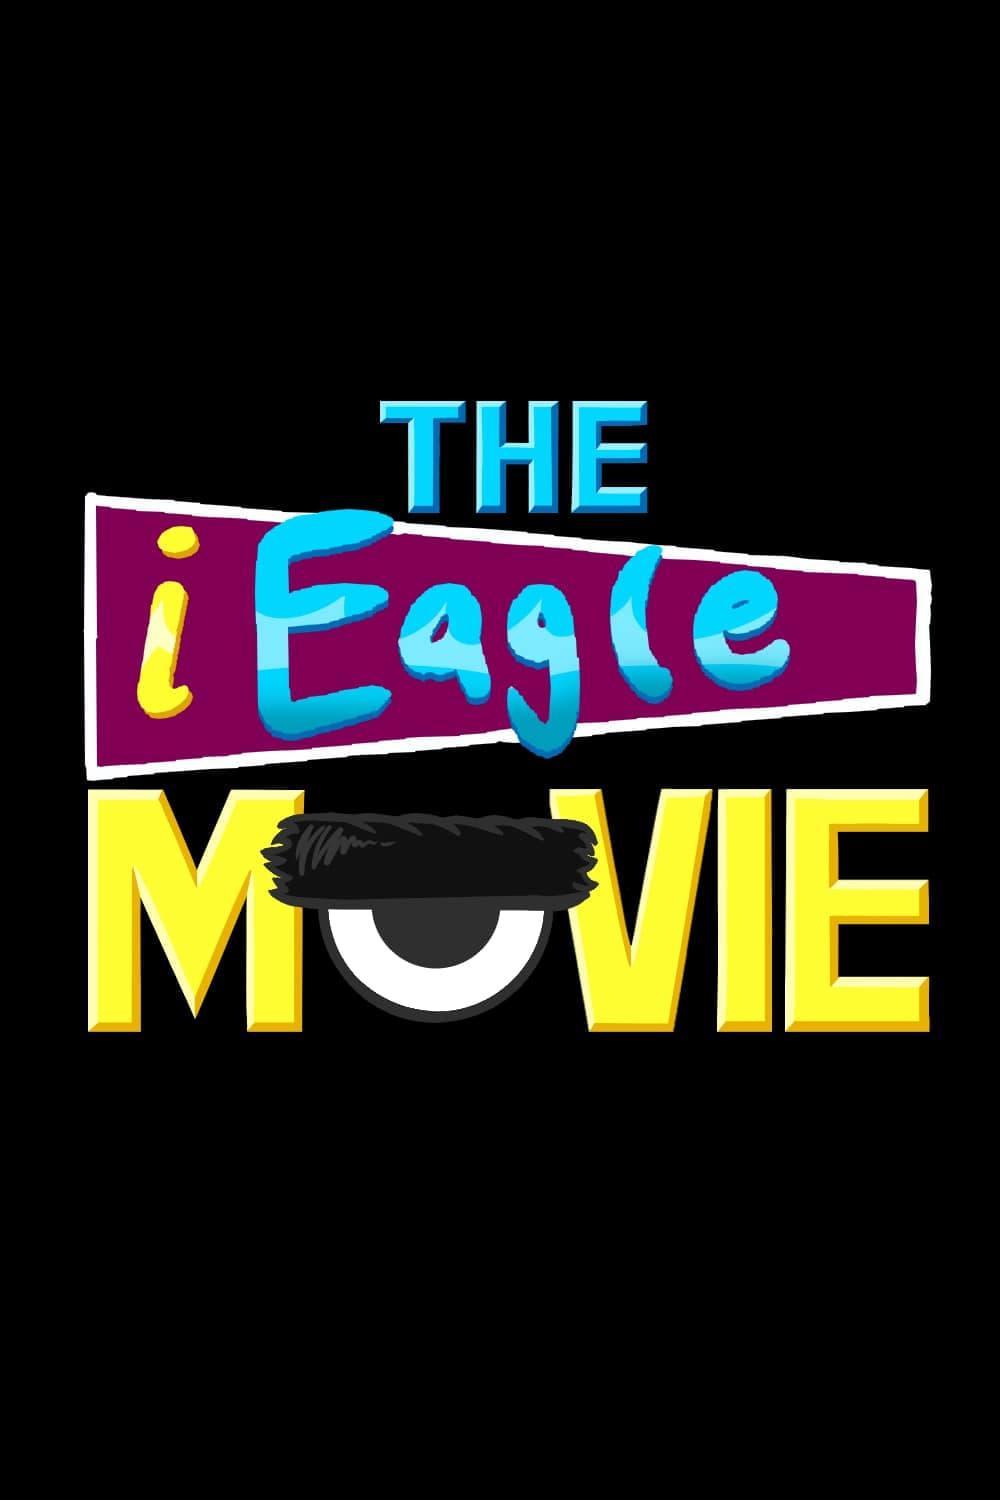 The iEagle Movie poster